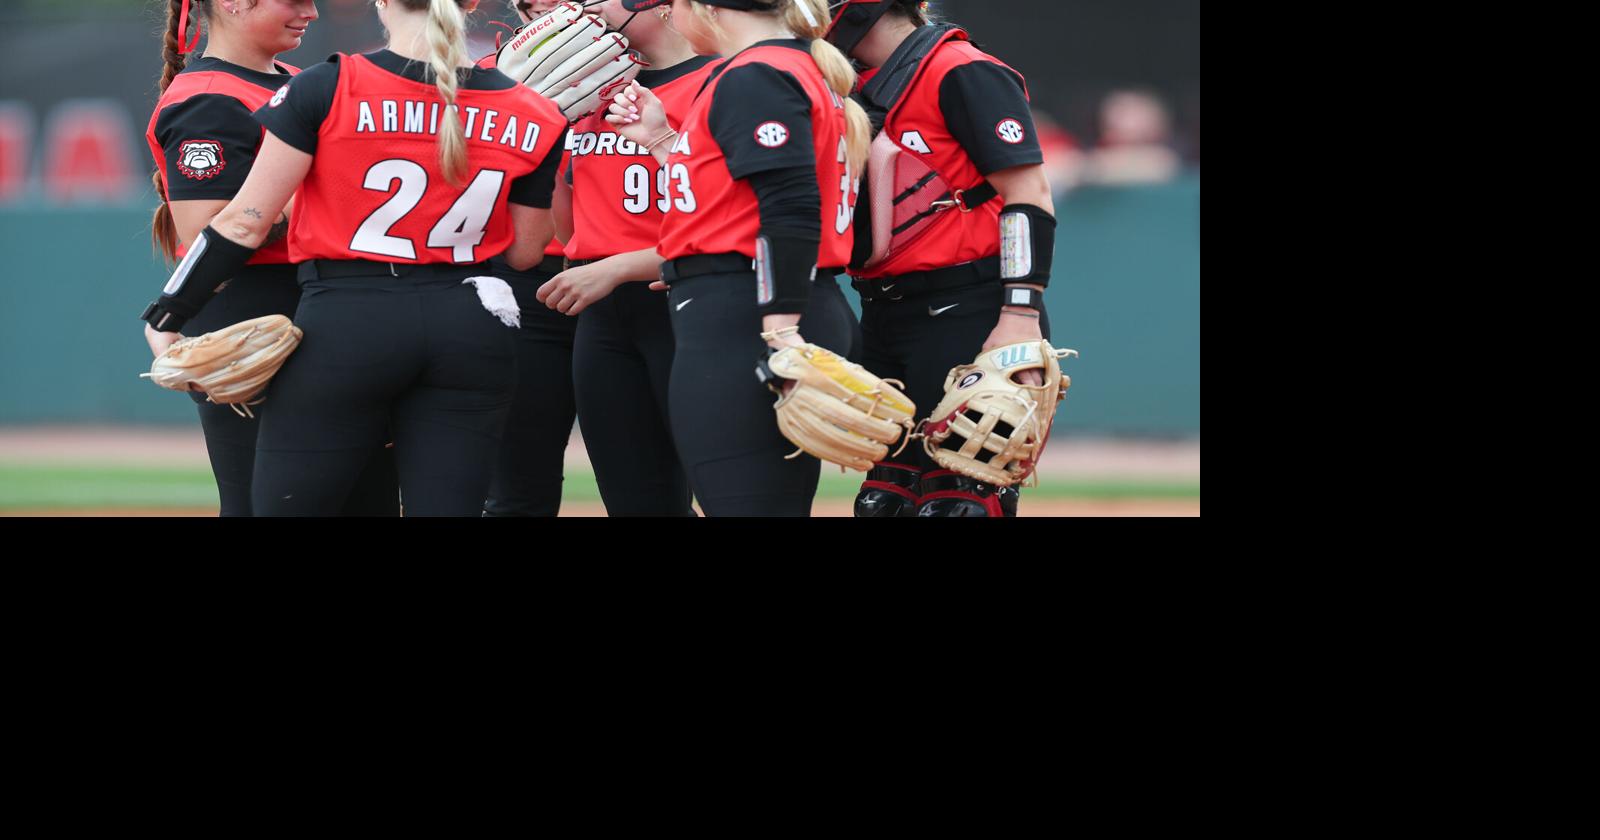 Georgia’s Softball Team Falls Short Against Florida in SEC Tournament, Struggles with Offensive Performance and Pitching Fatigue